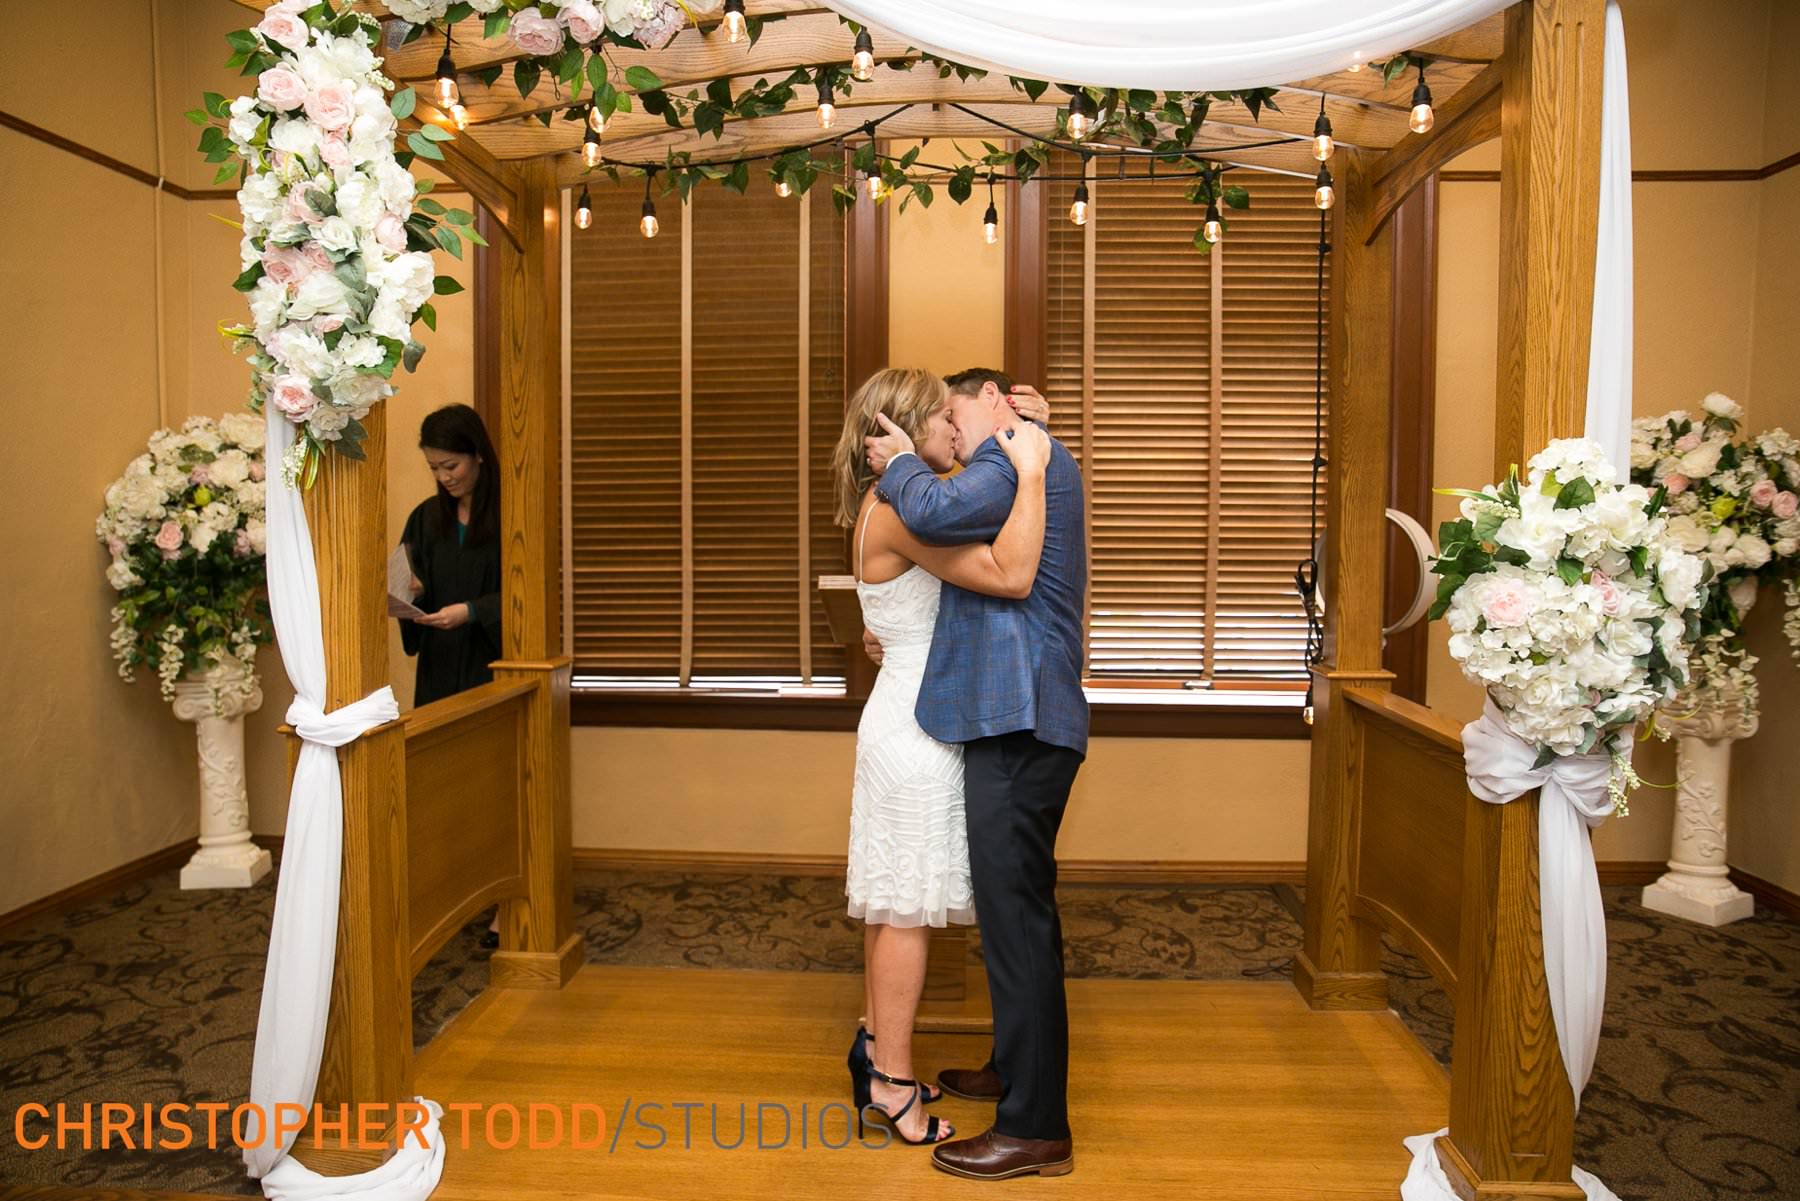 Couple's first kiss at their civil ceremony at the old courthouse in santa ana.